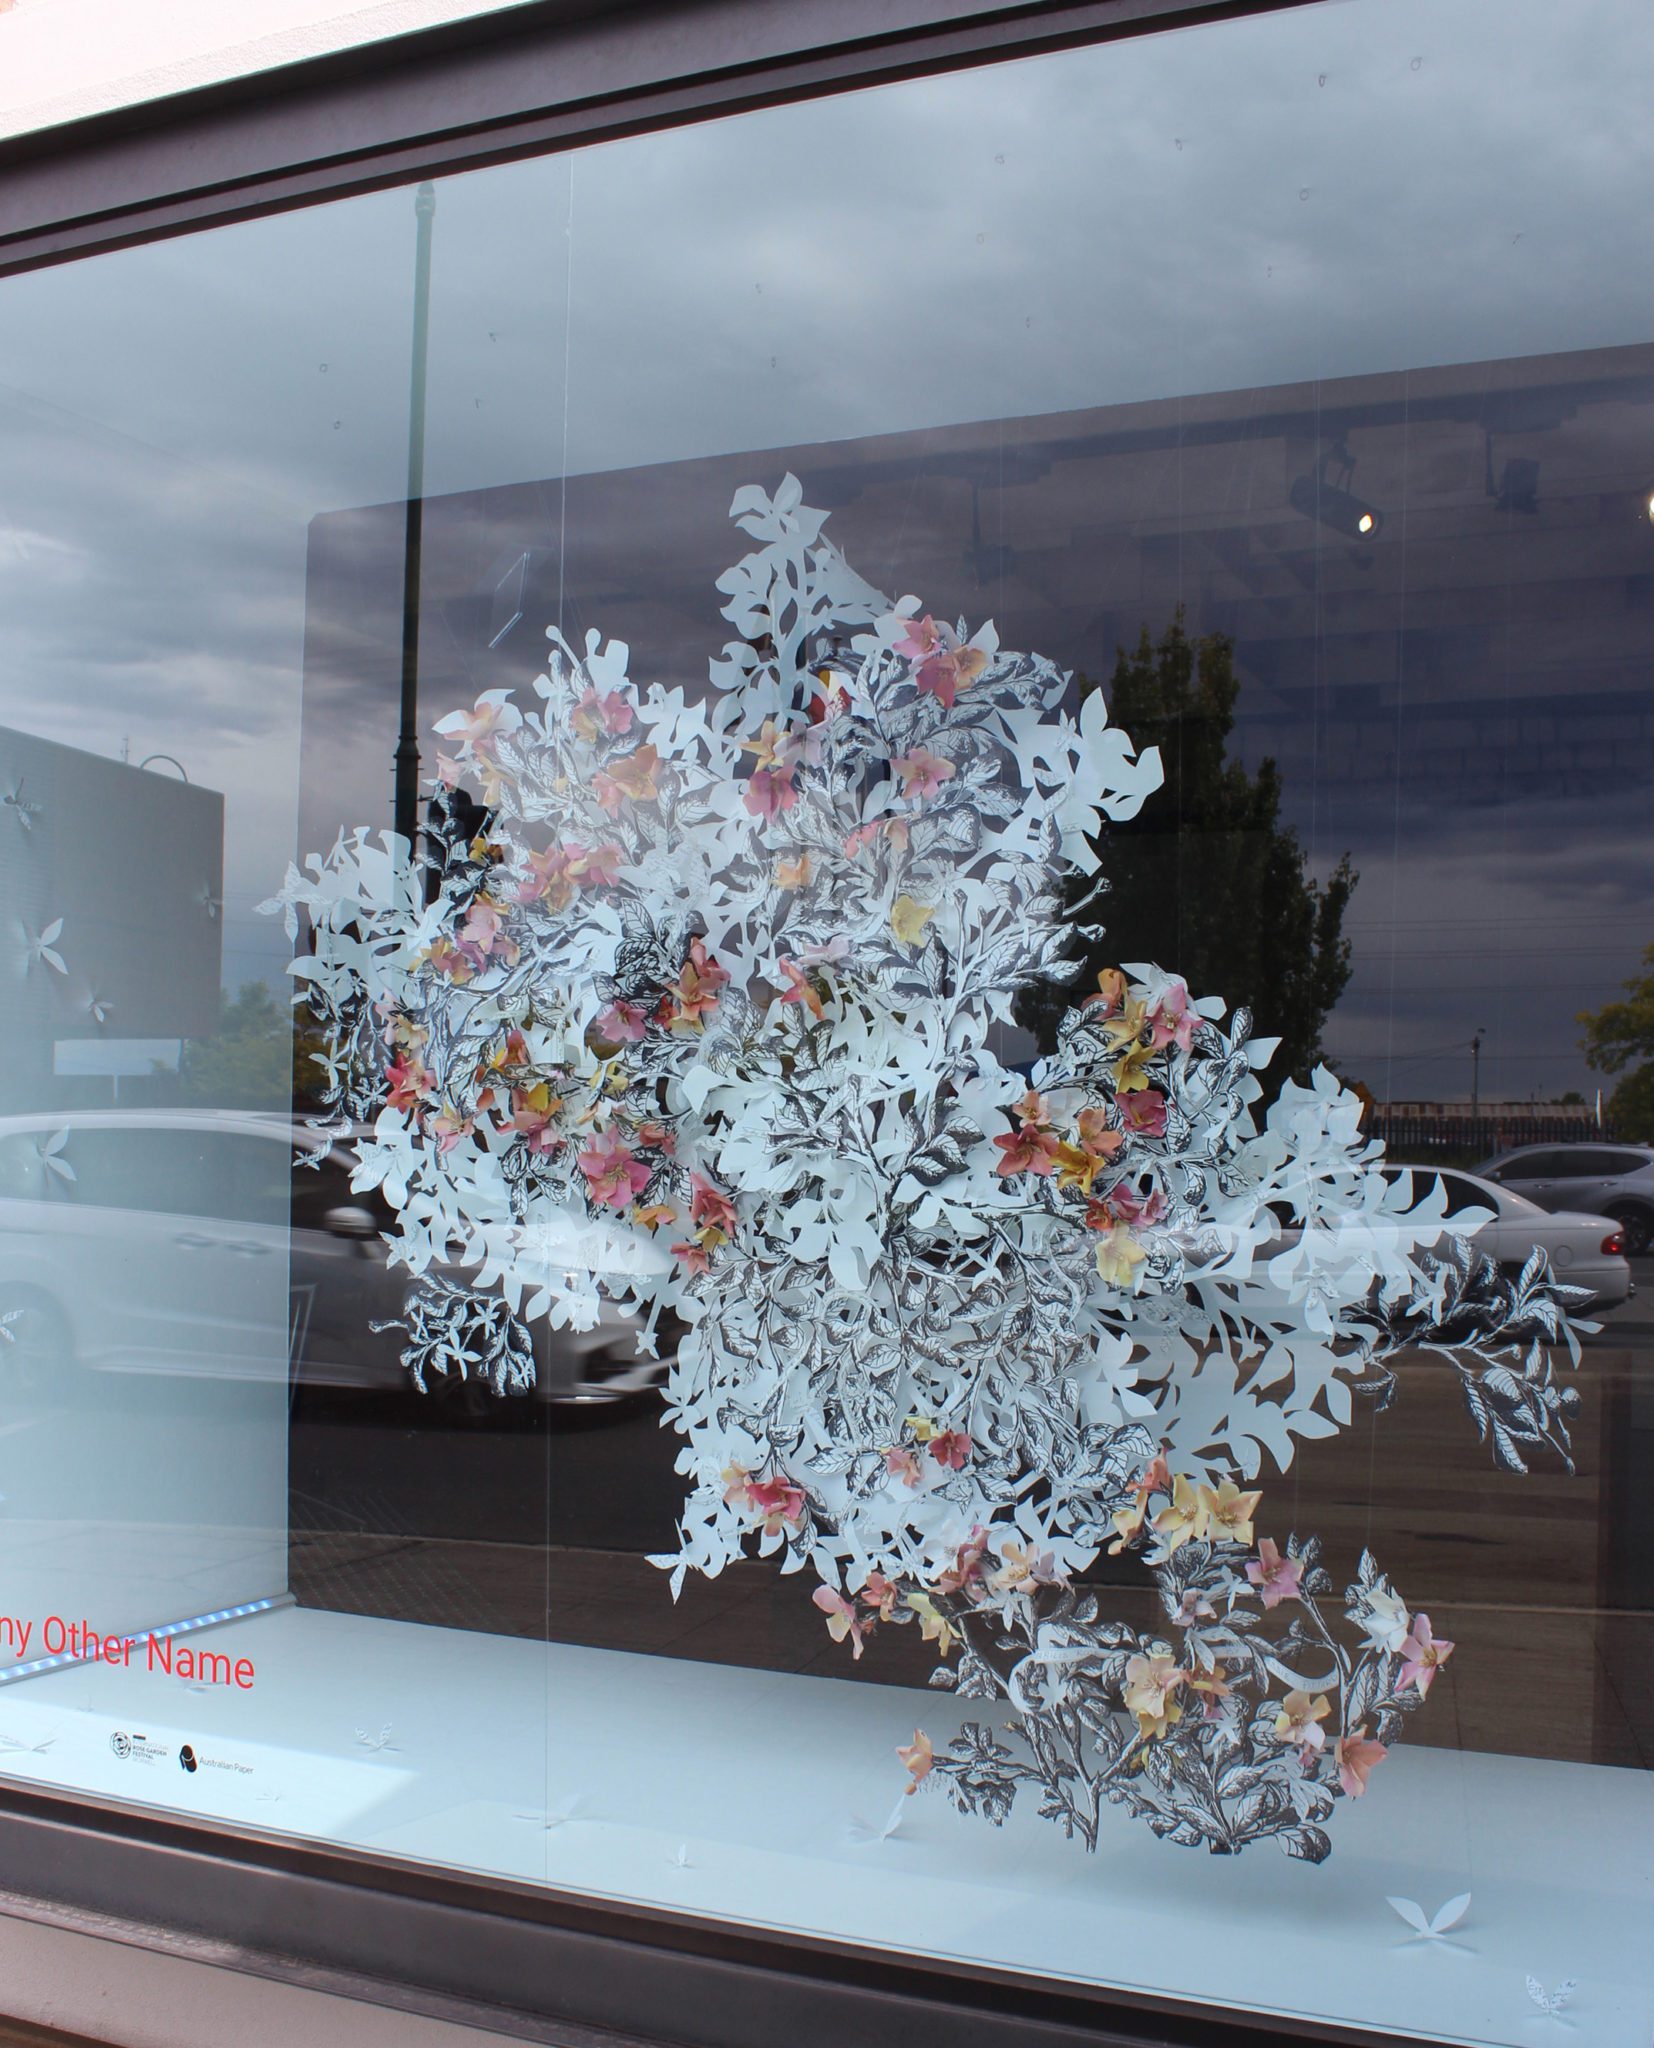 Jessie Pittard, A Rose by Any Other Name, 2020, Paper installation, Courtesy the artist. Shown in the front window at Latrobe Regional Gallery, 2020. Made for the 2020 Morwell International Rose Garden Festival.